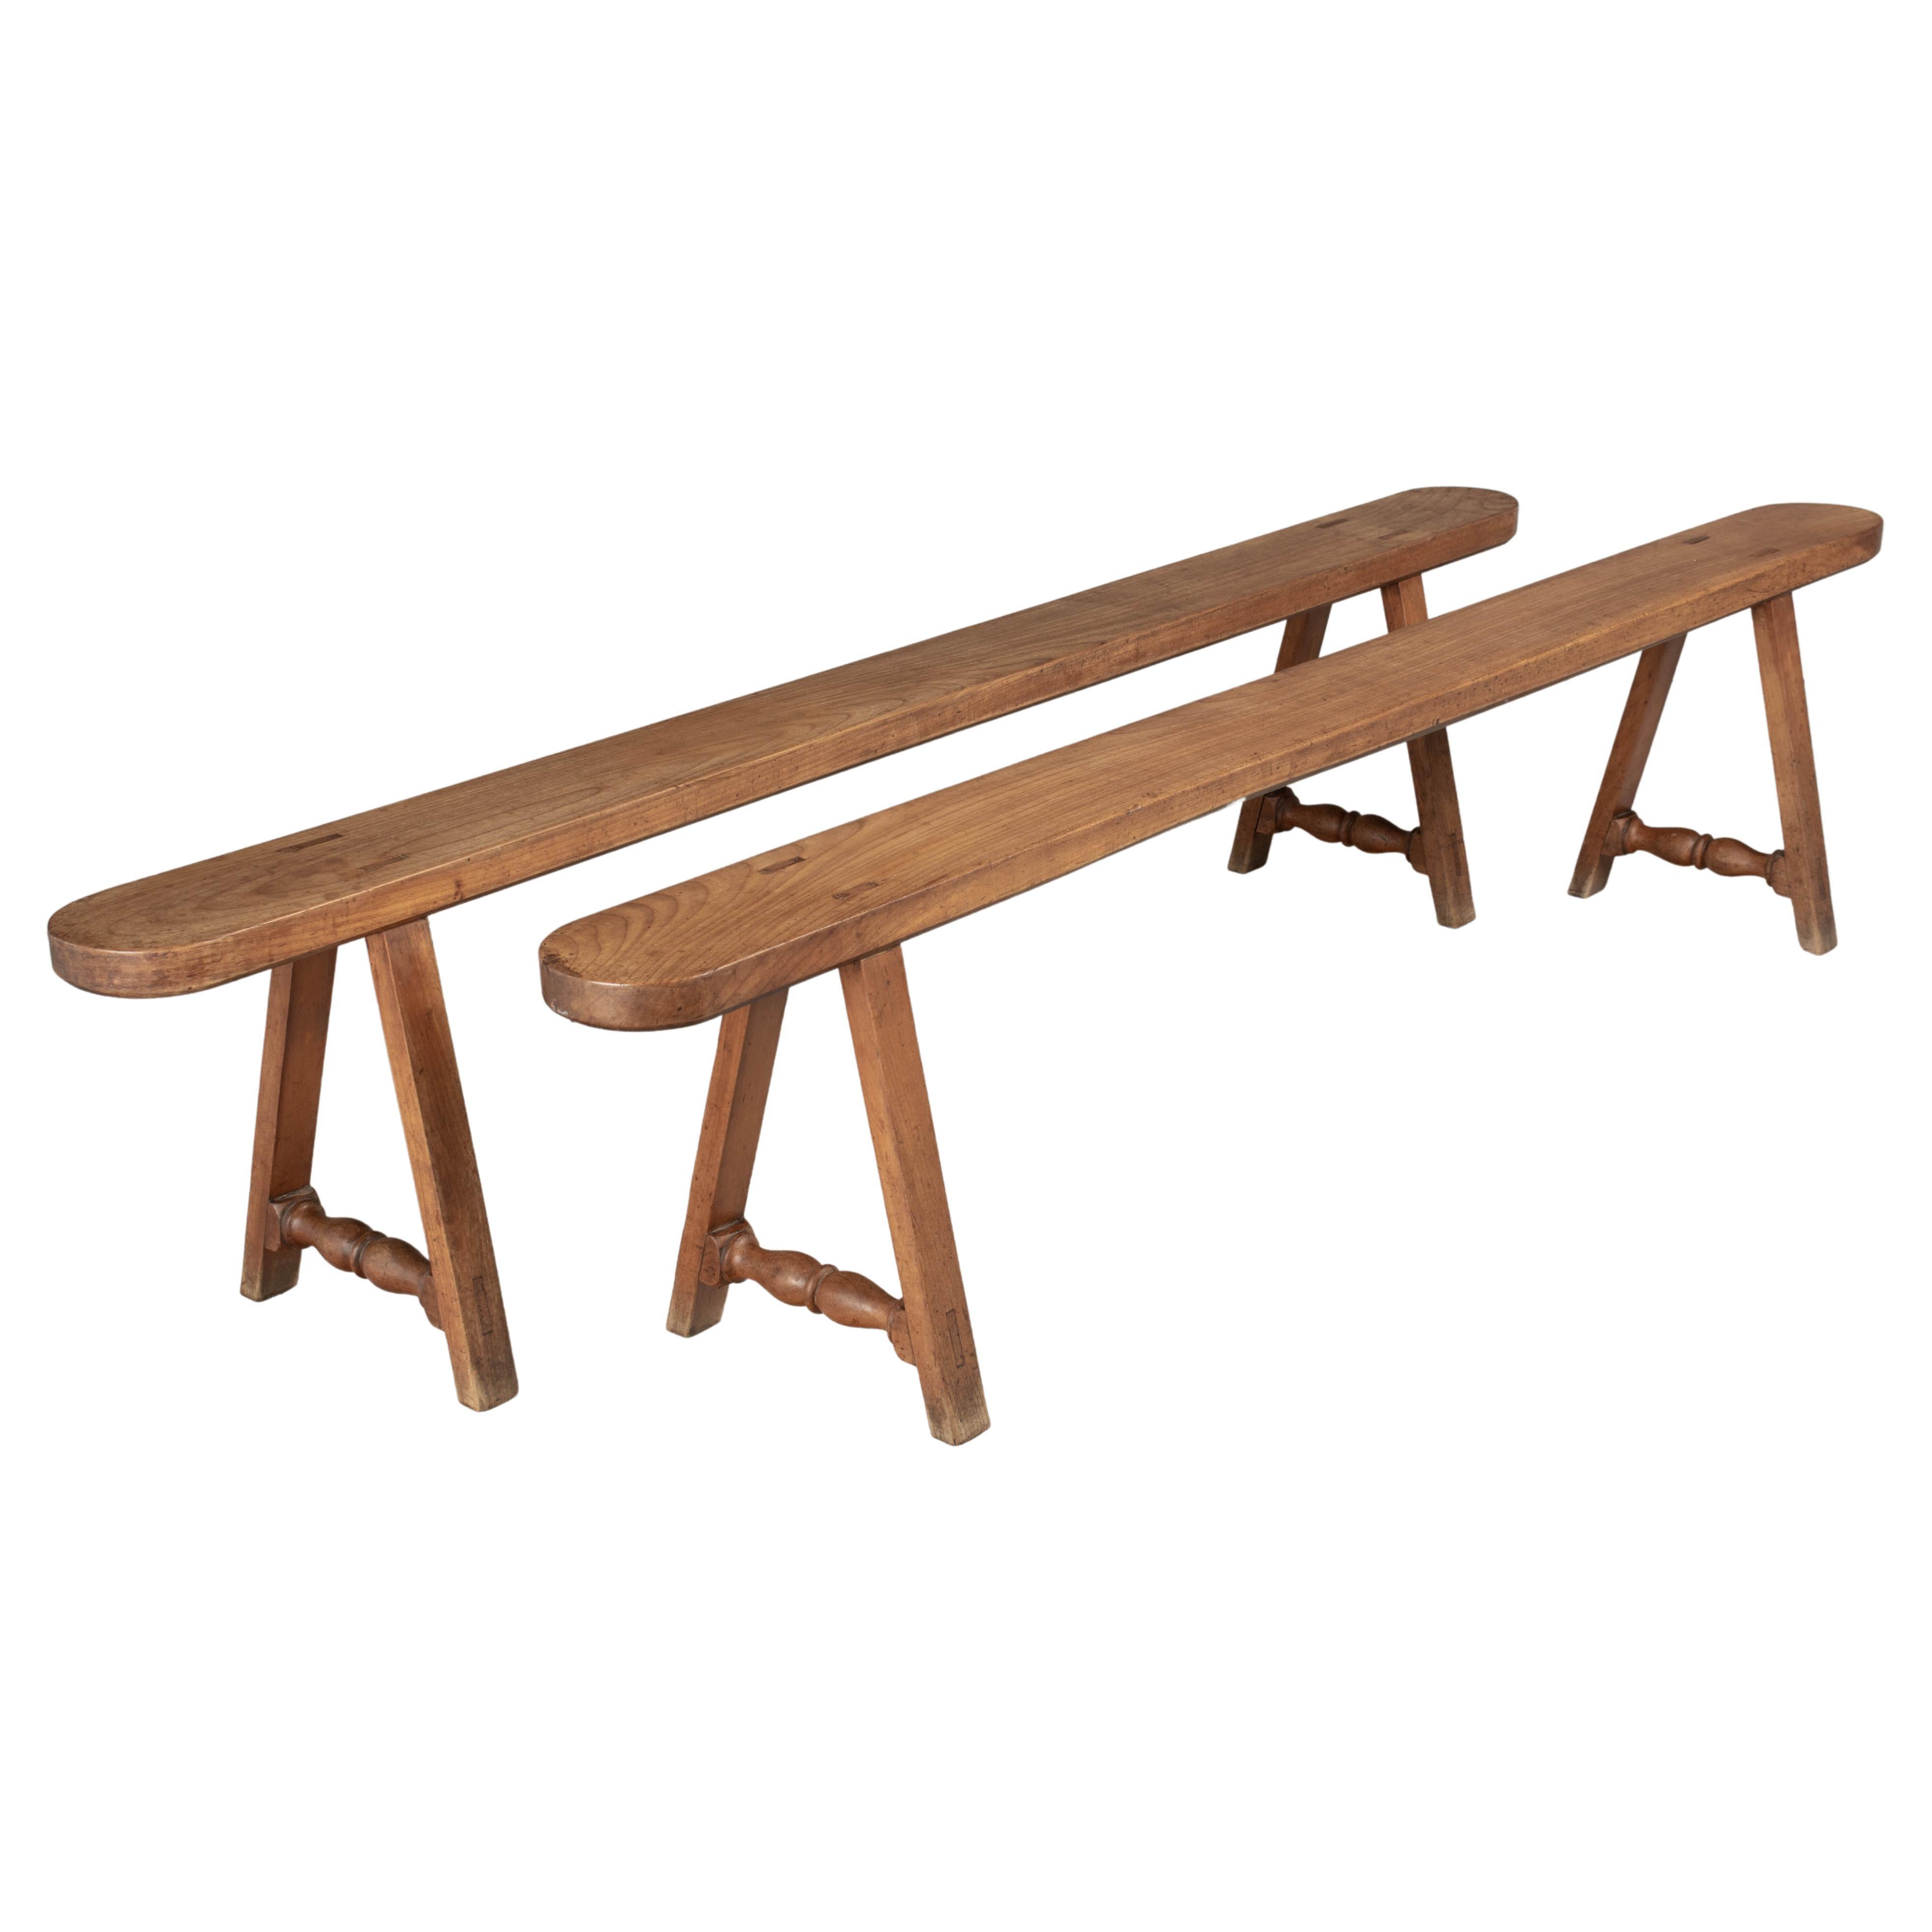 Country French Cherry Wood Farm Table Benches, a Pair For Sale